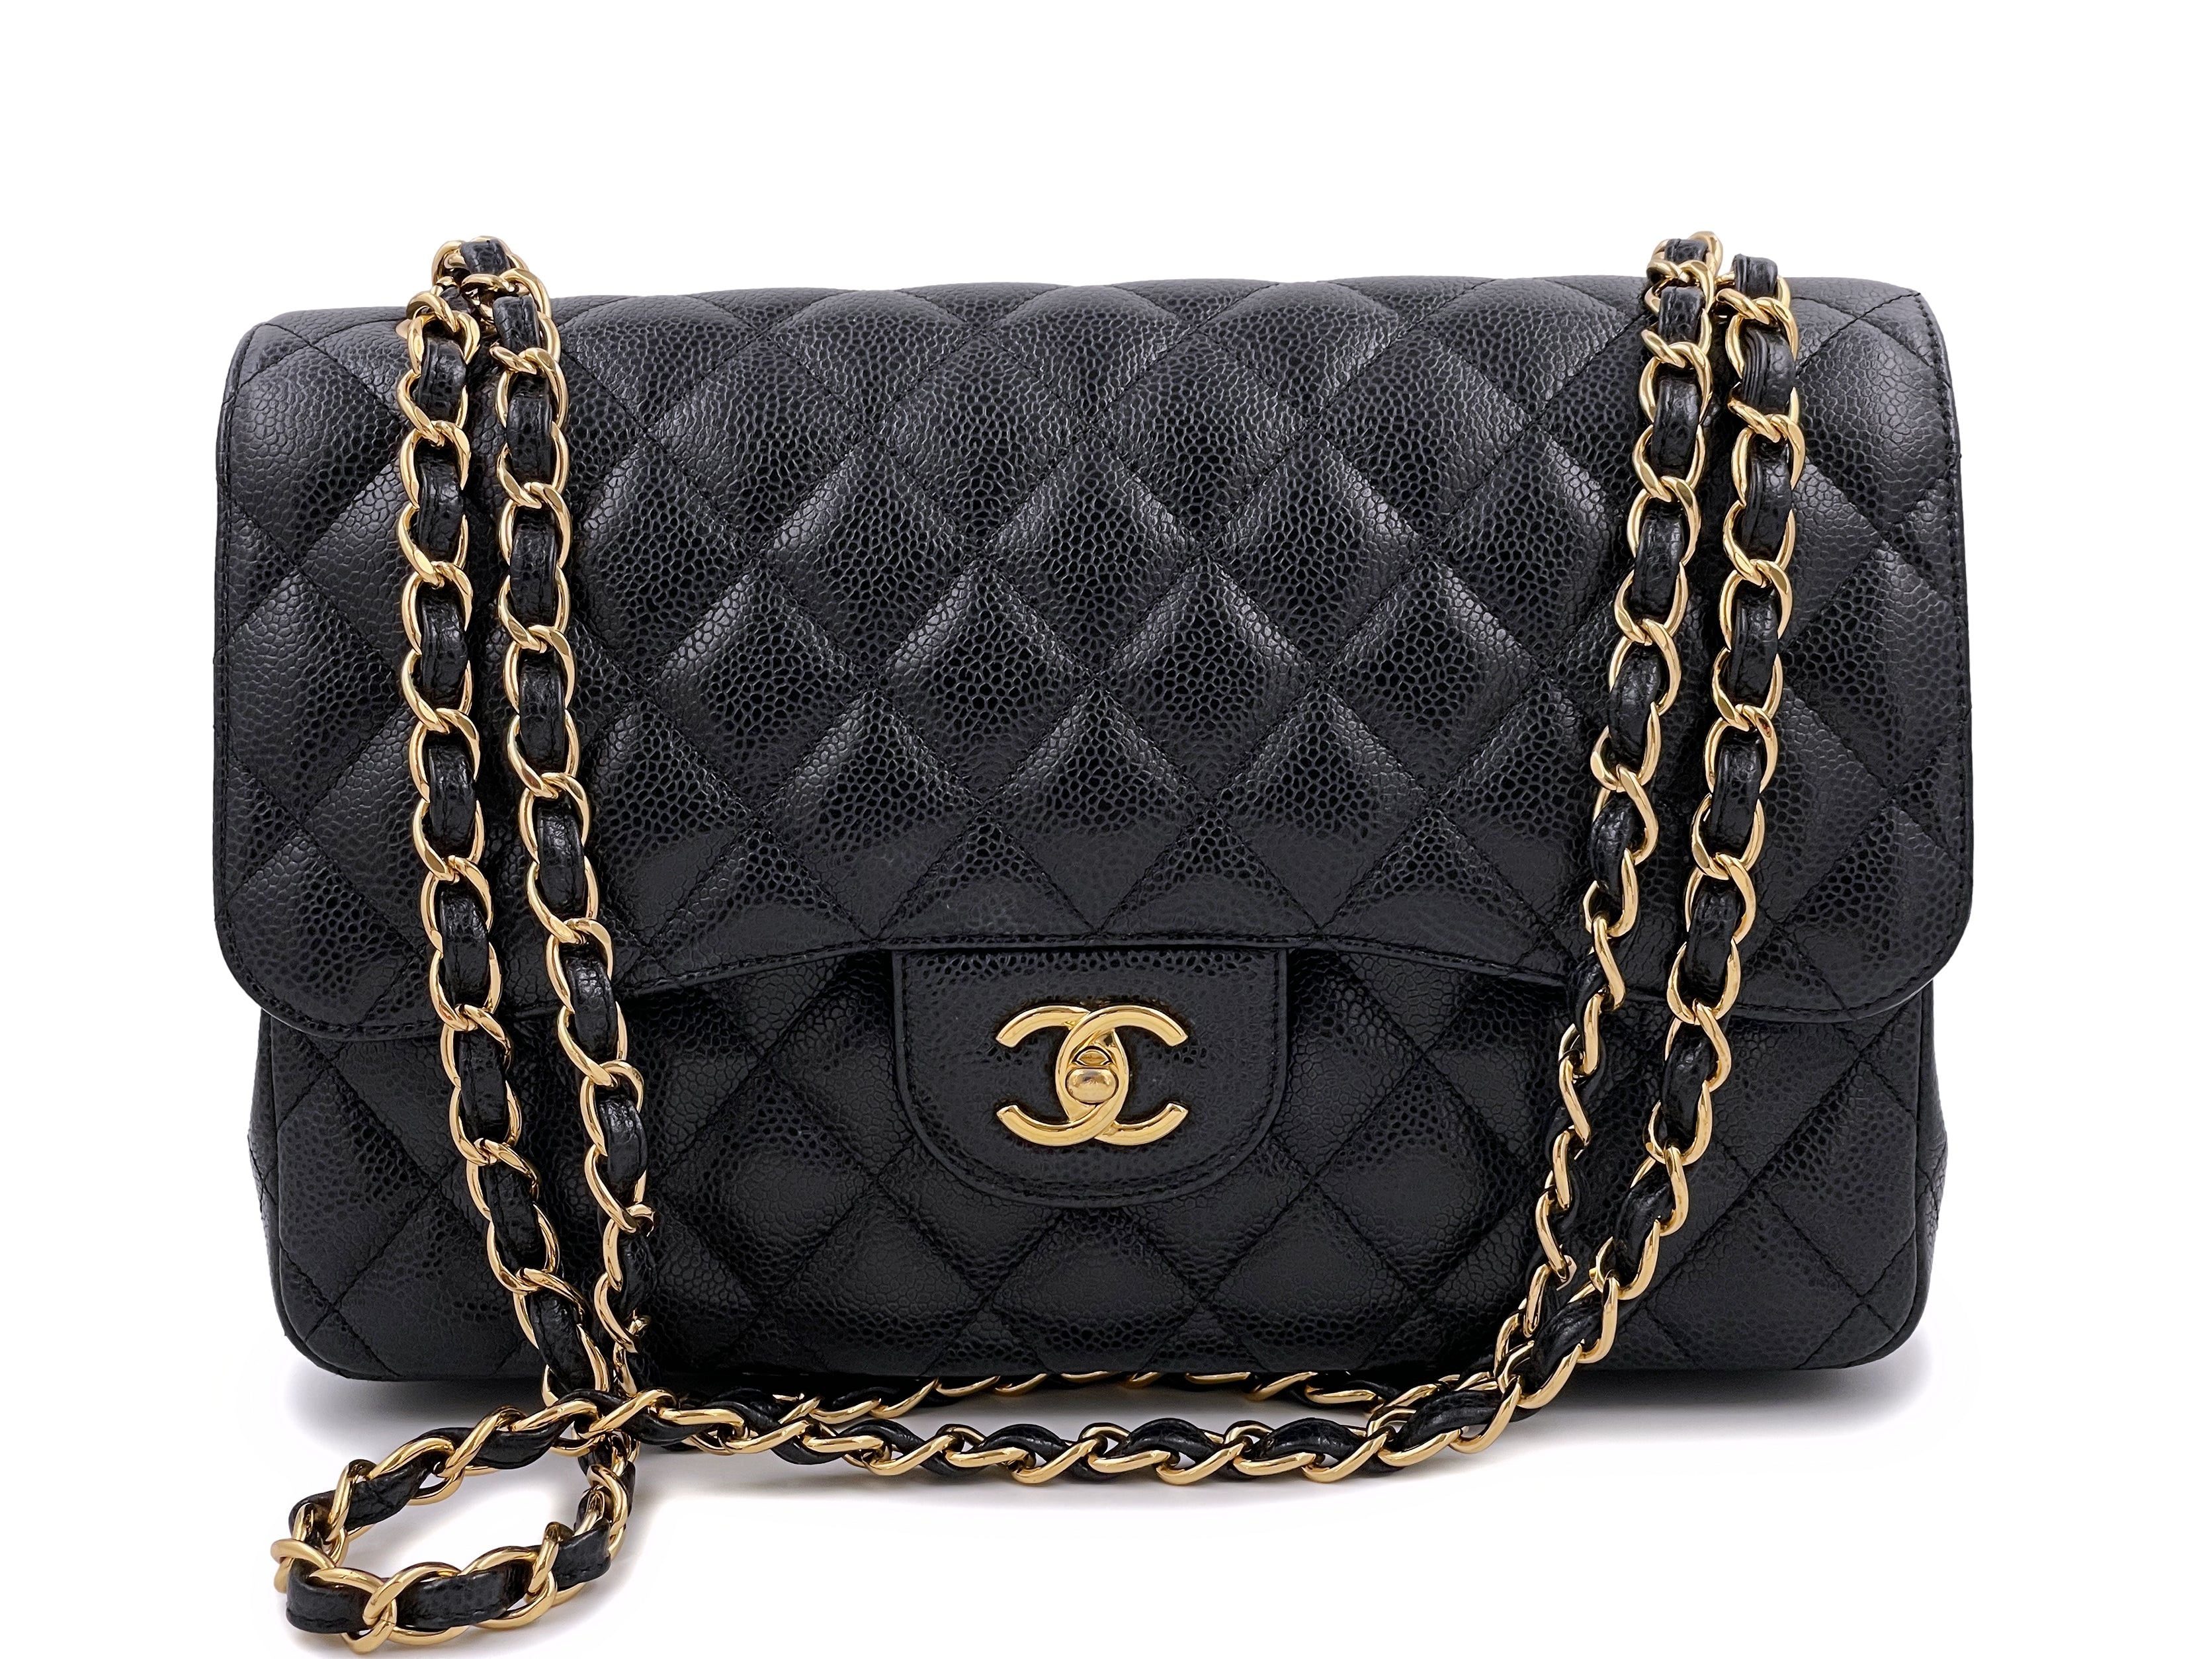 CHANEL Sequin Jumbo Flap Bag in Black - More Than You Can Imagine